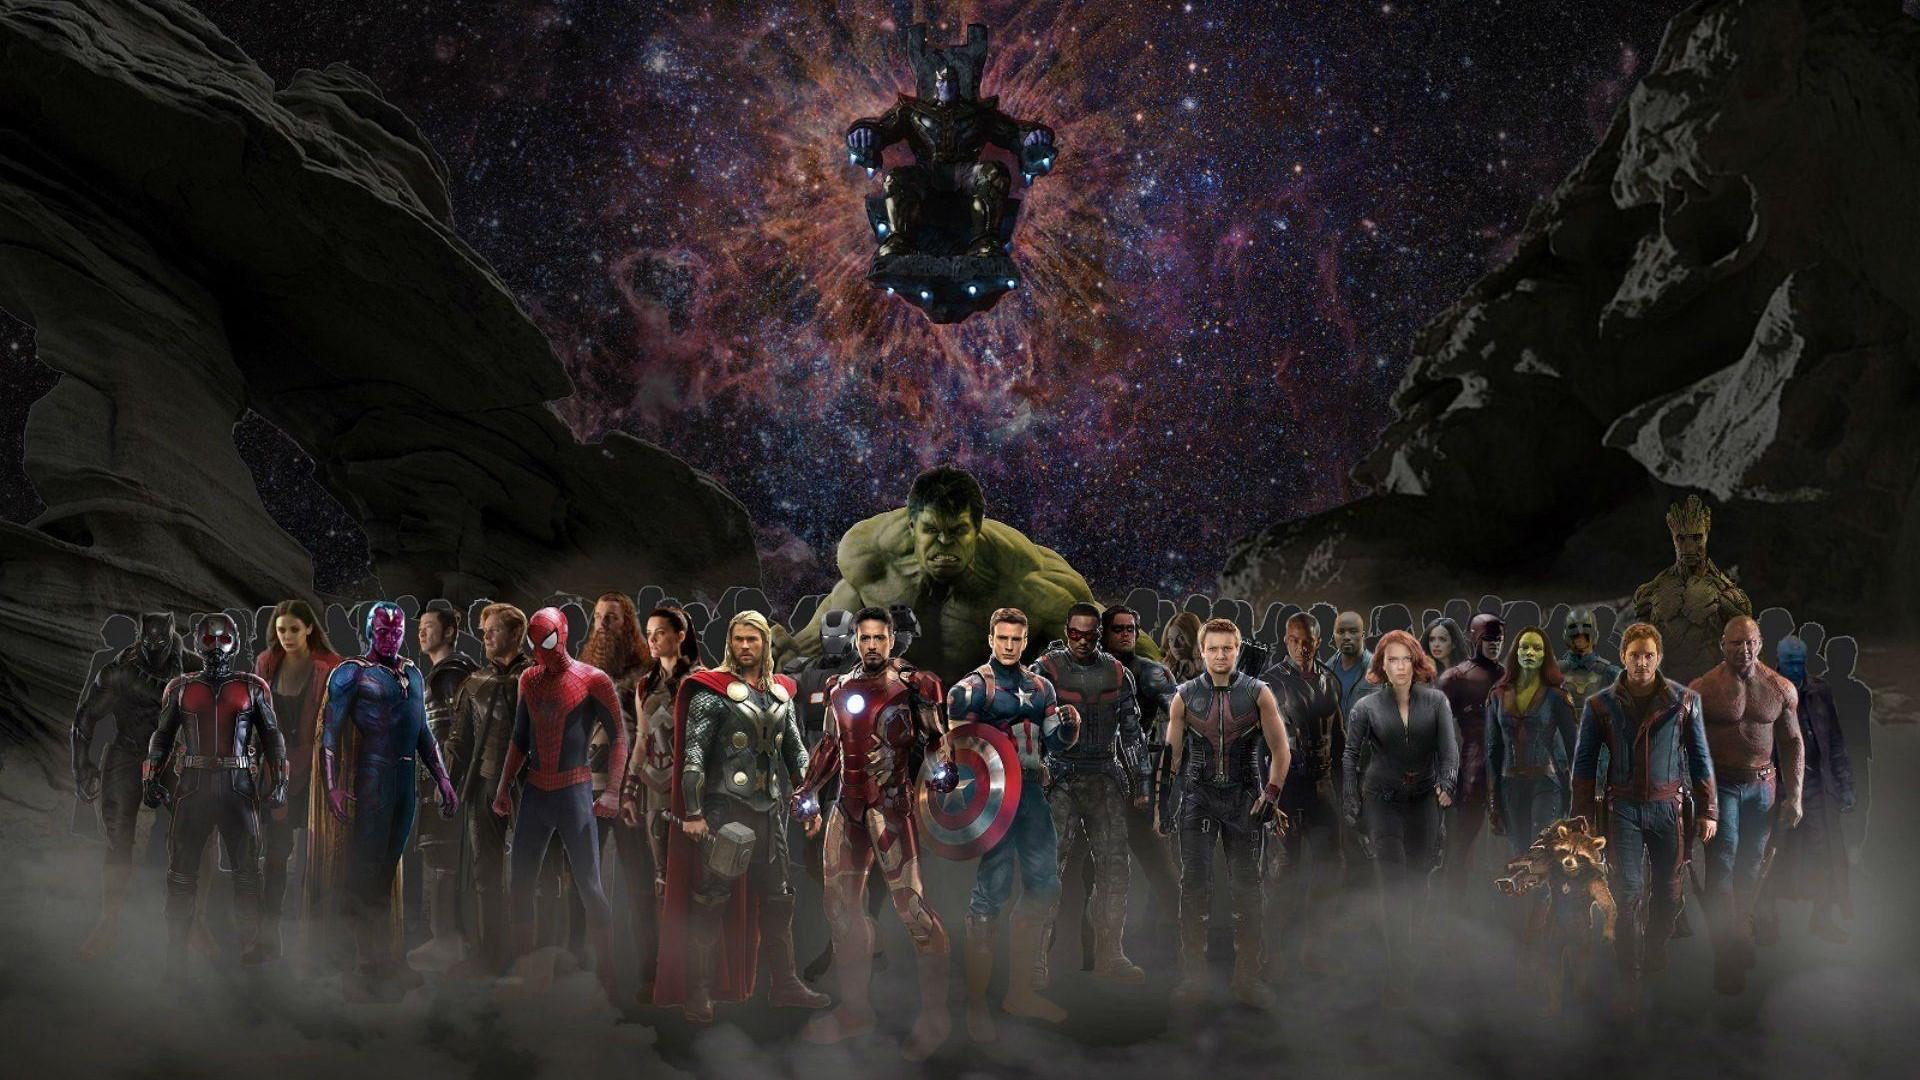 Avengers Wallpapers  Top 82 Best Avengers Wallpapers  HQ 